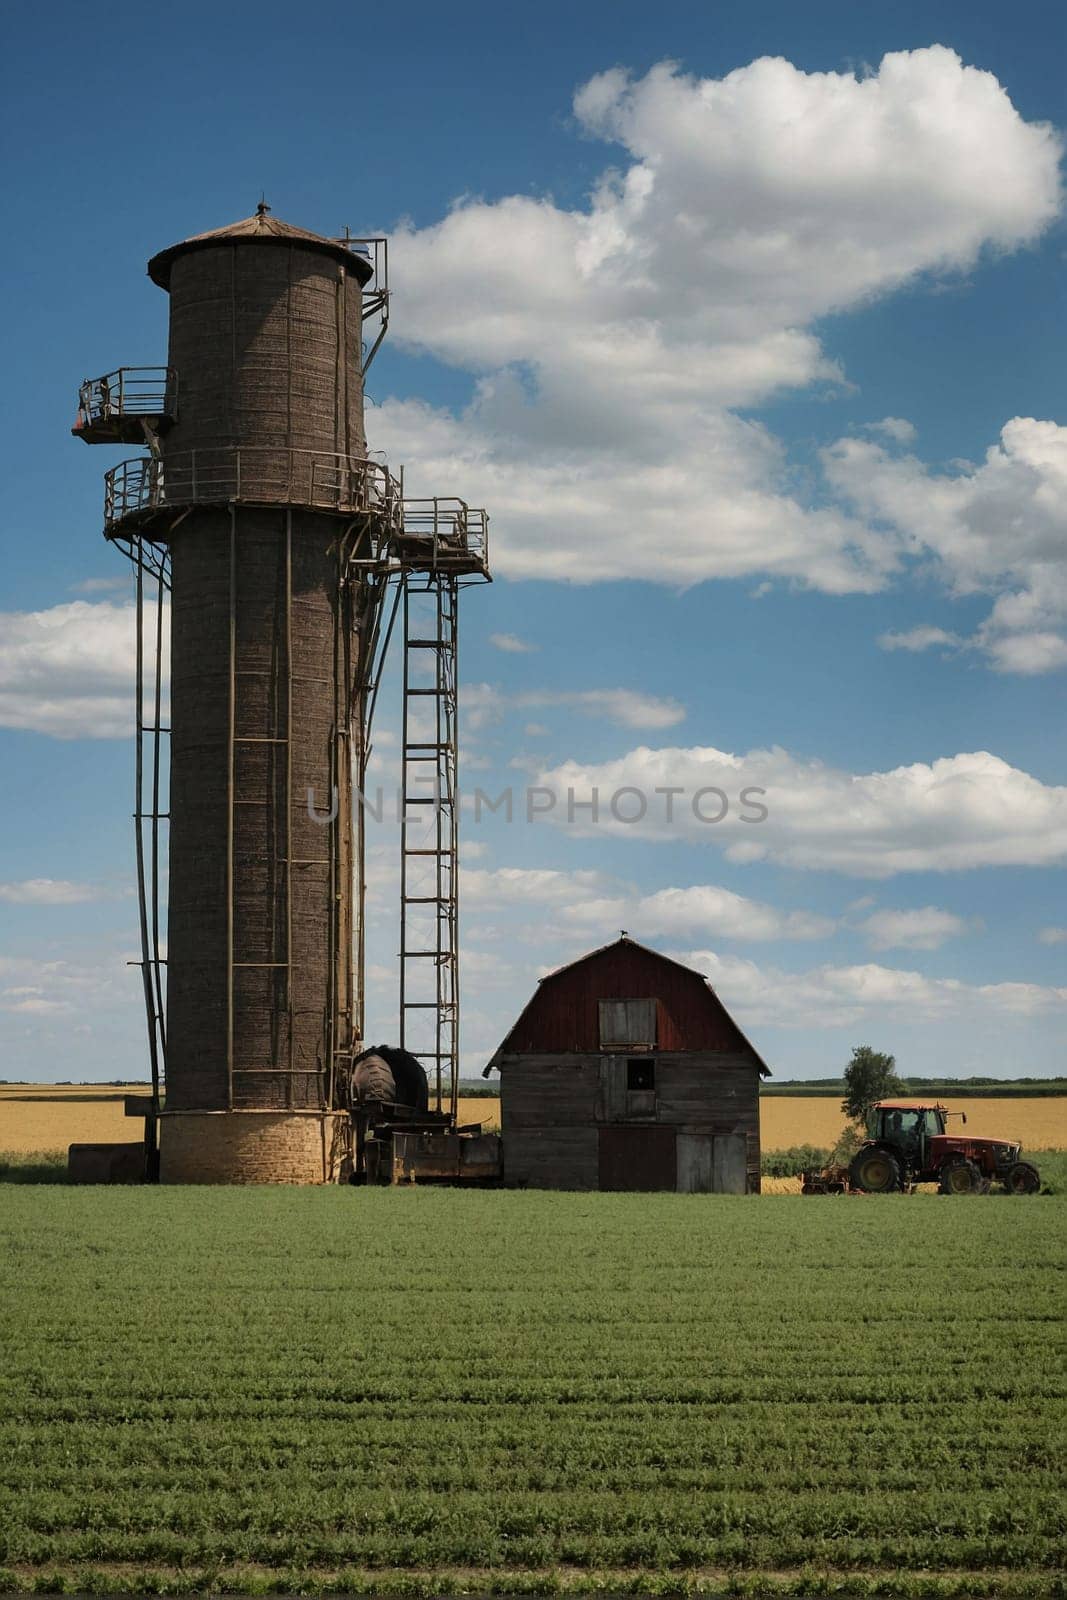 A landscape photo featuring a farm with a silo and a barn in the background, showcasing the rural setting and agricultural structures.